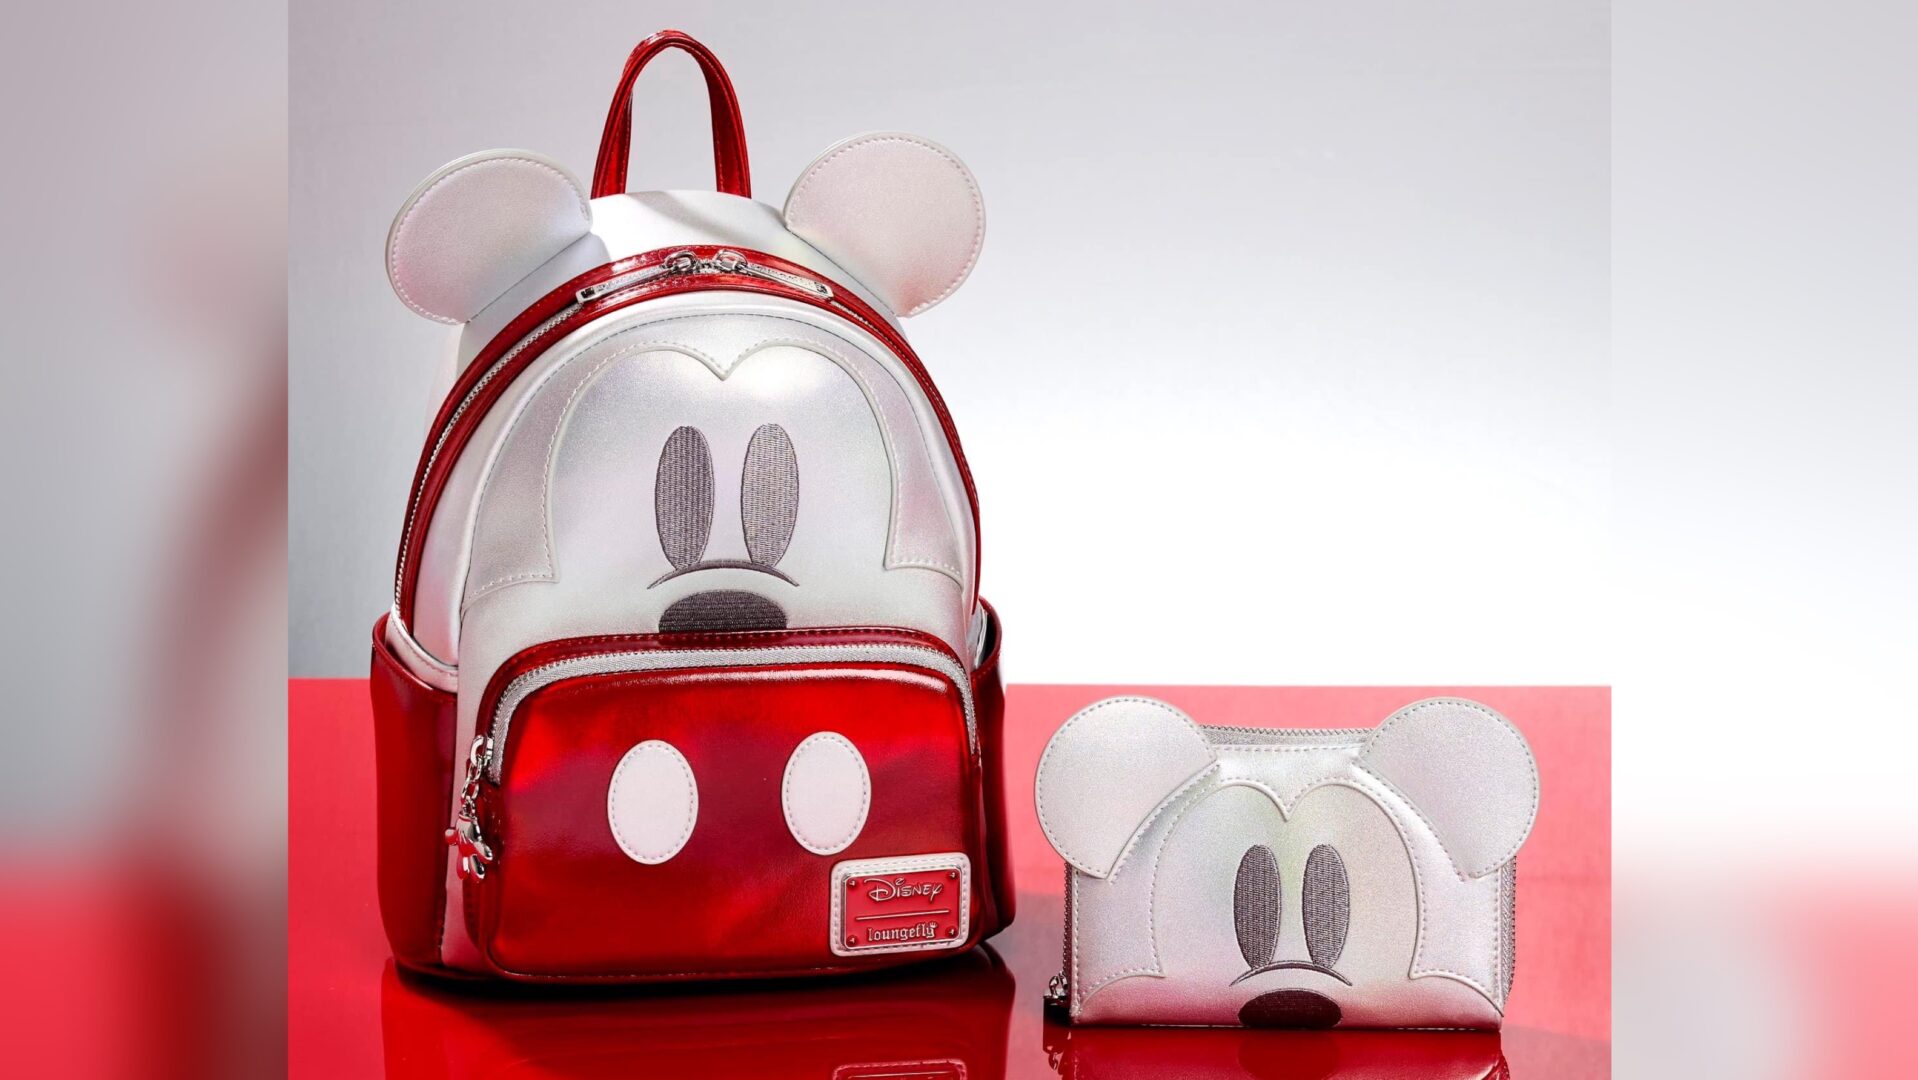 Disney100 Limited Edition Platinum Collection To Celebrate 100 Years Of Wonder!